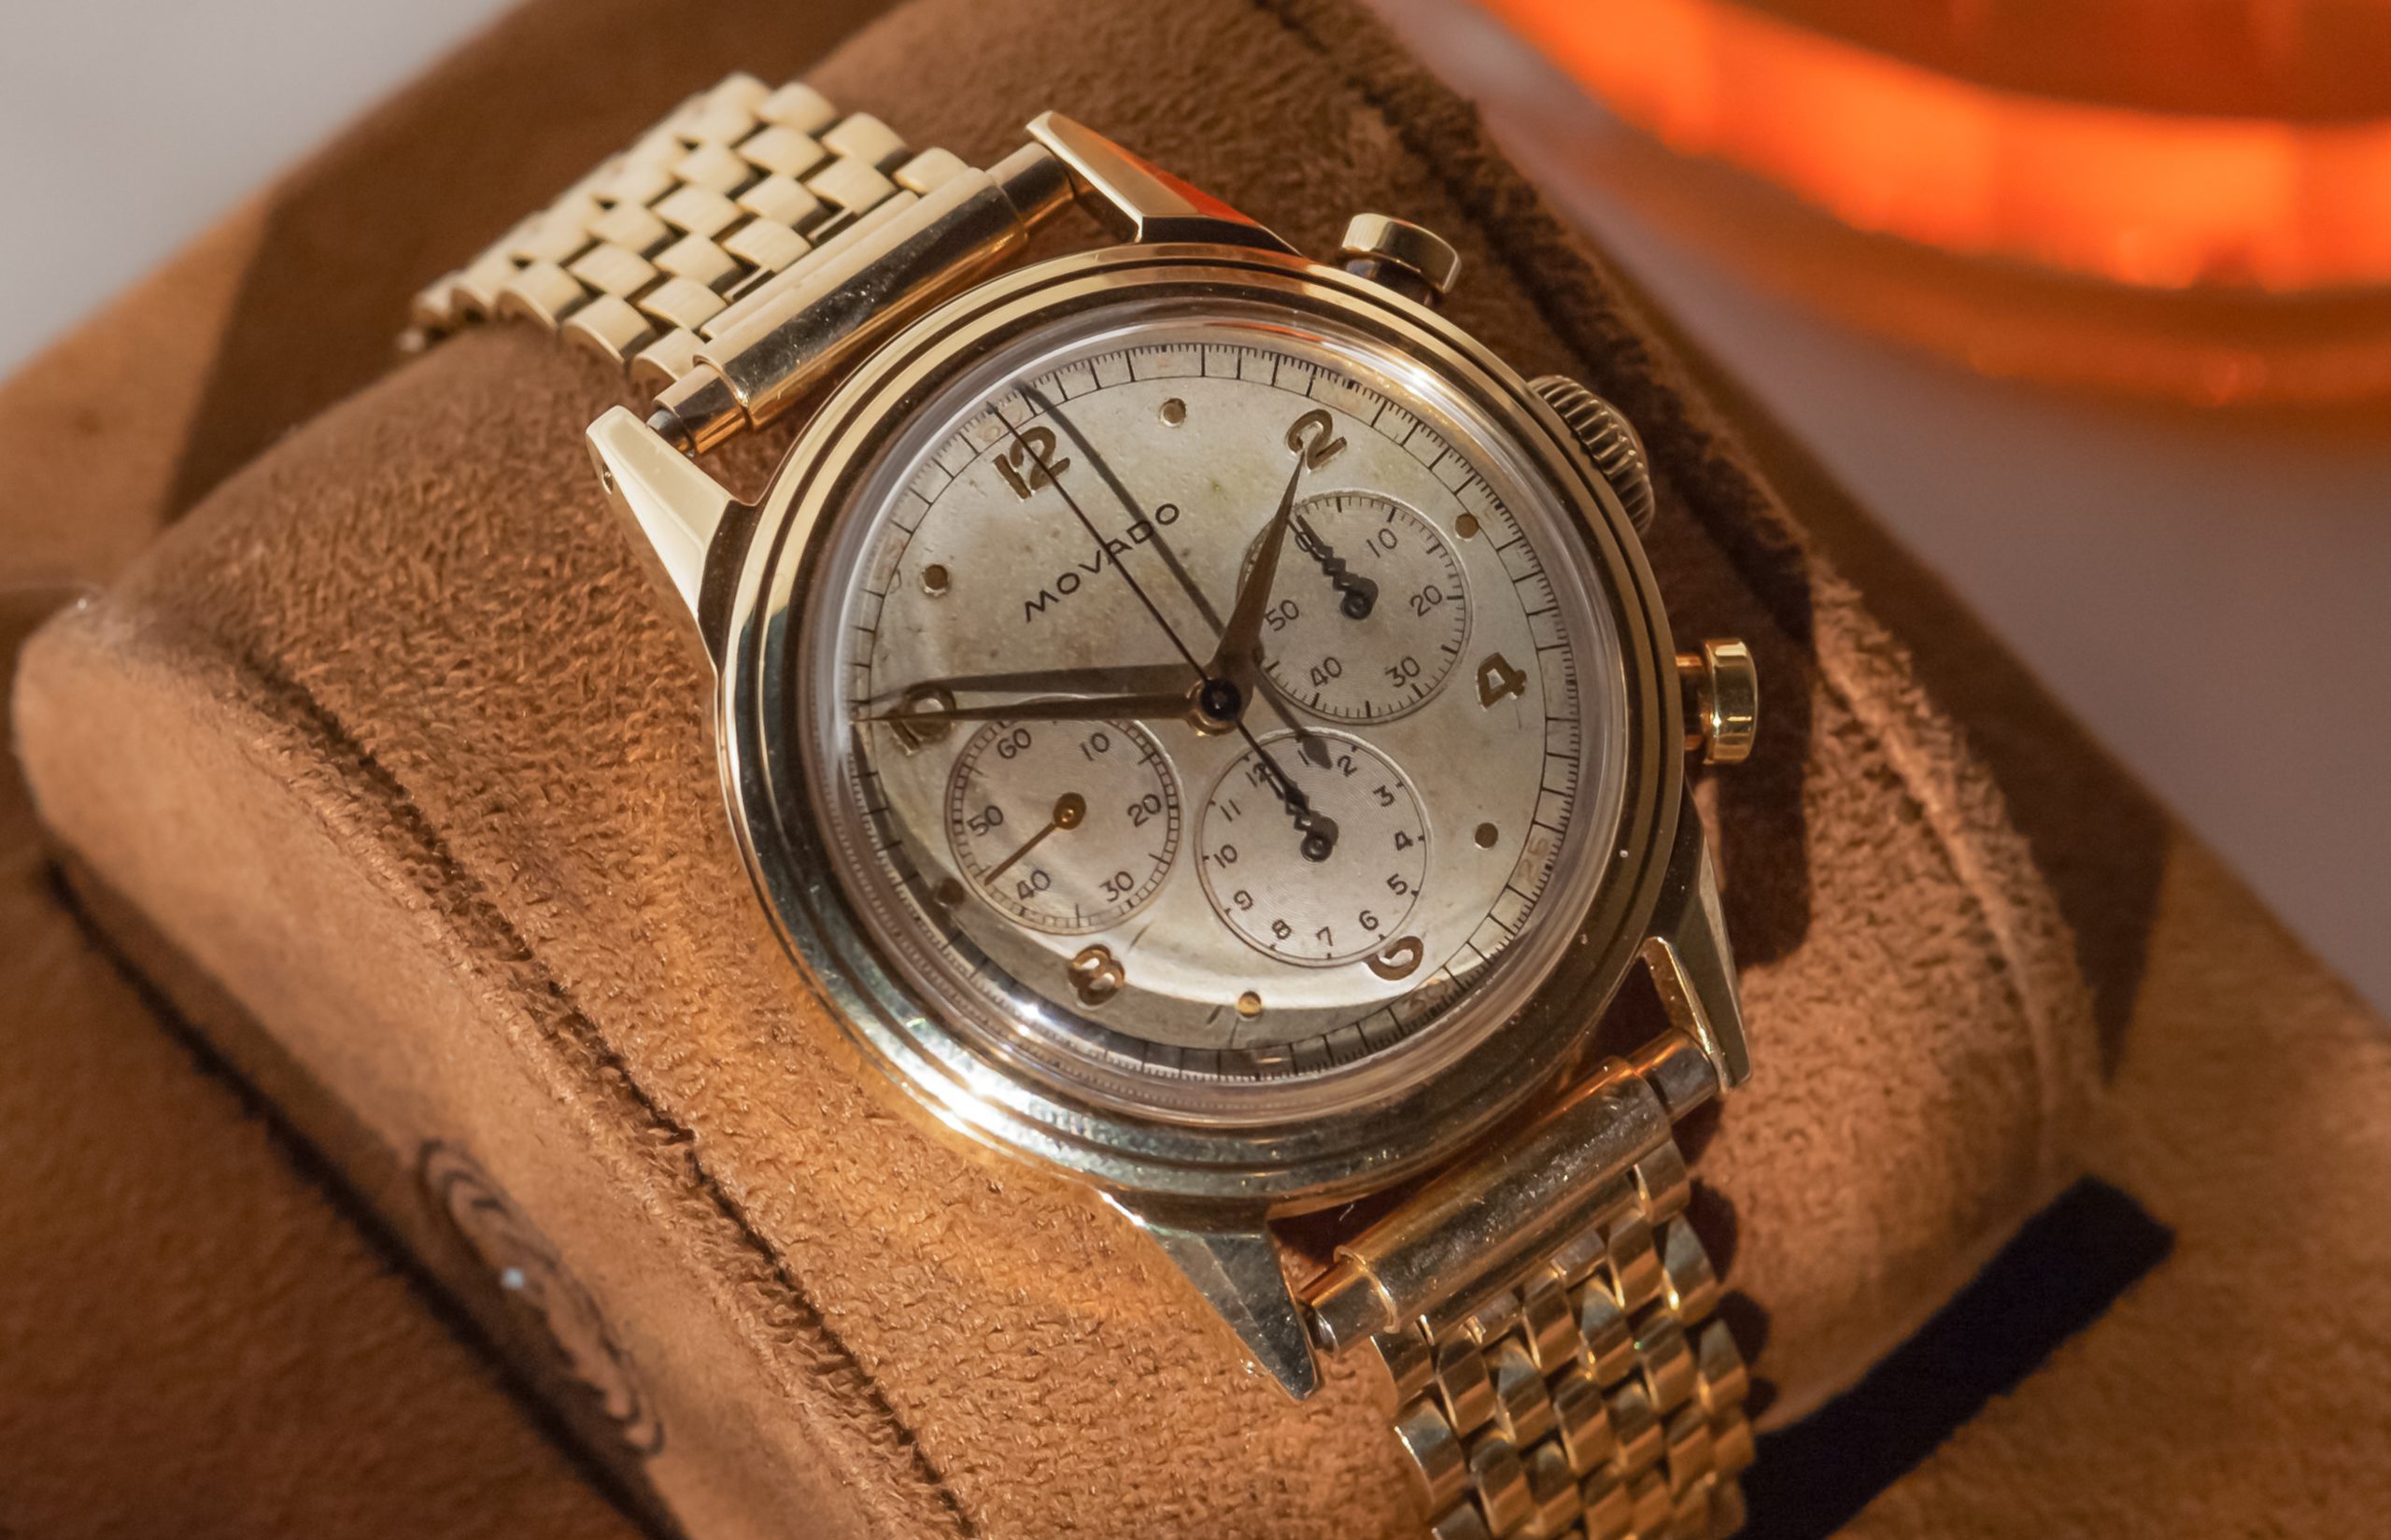 The Movado M95 vintage watch hands-on